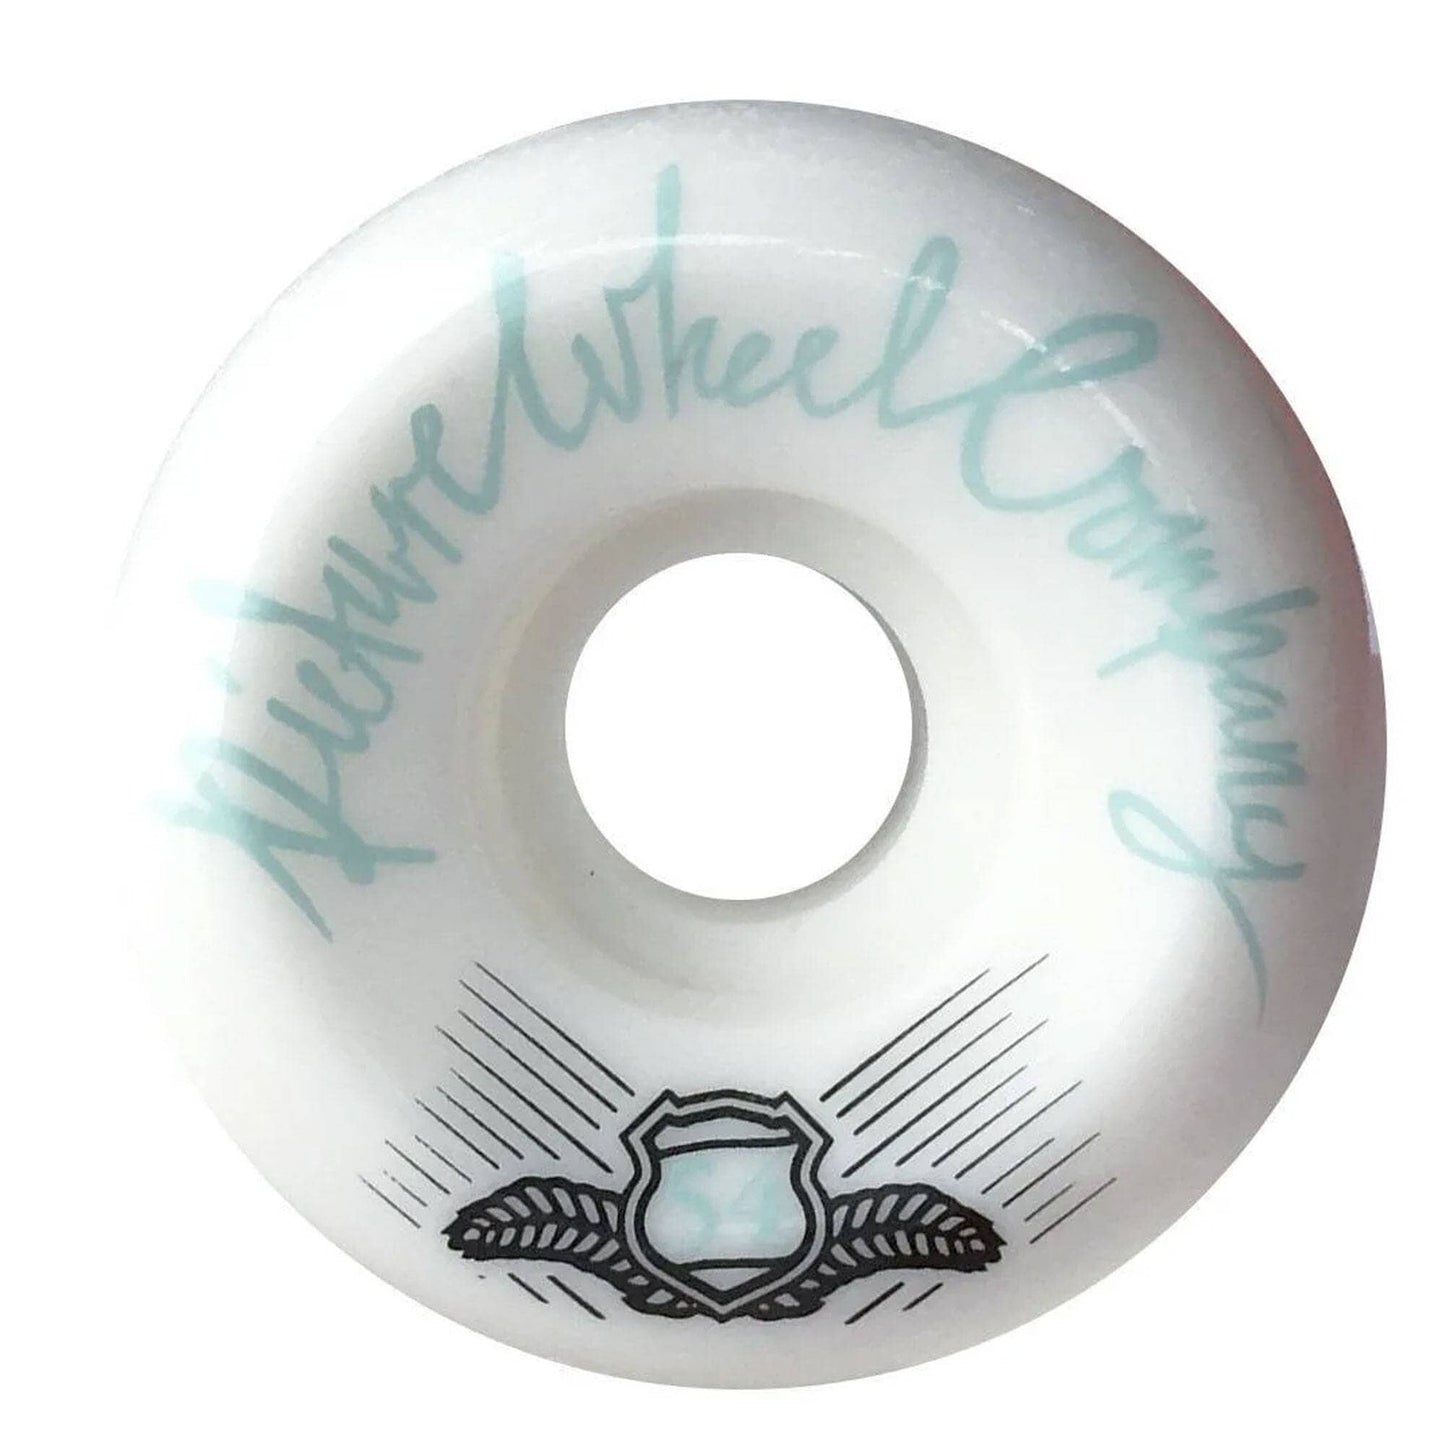 Picture - POP Wheels - 54mm 99a